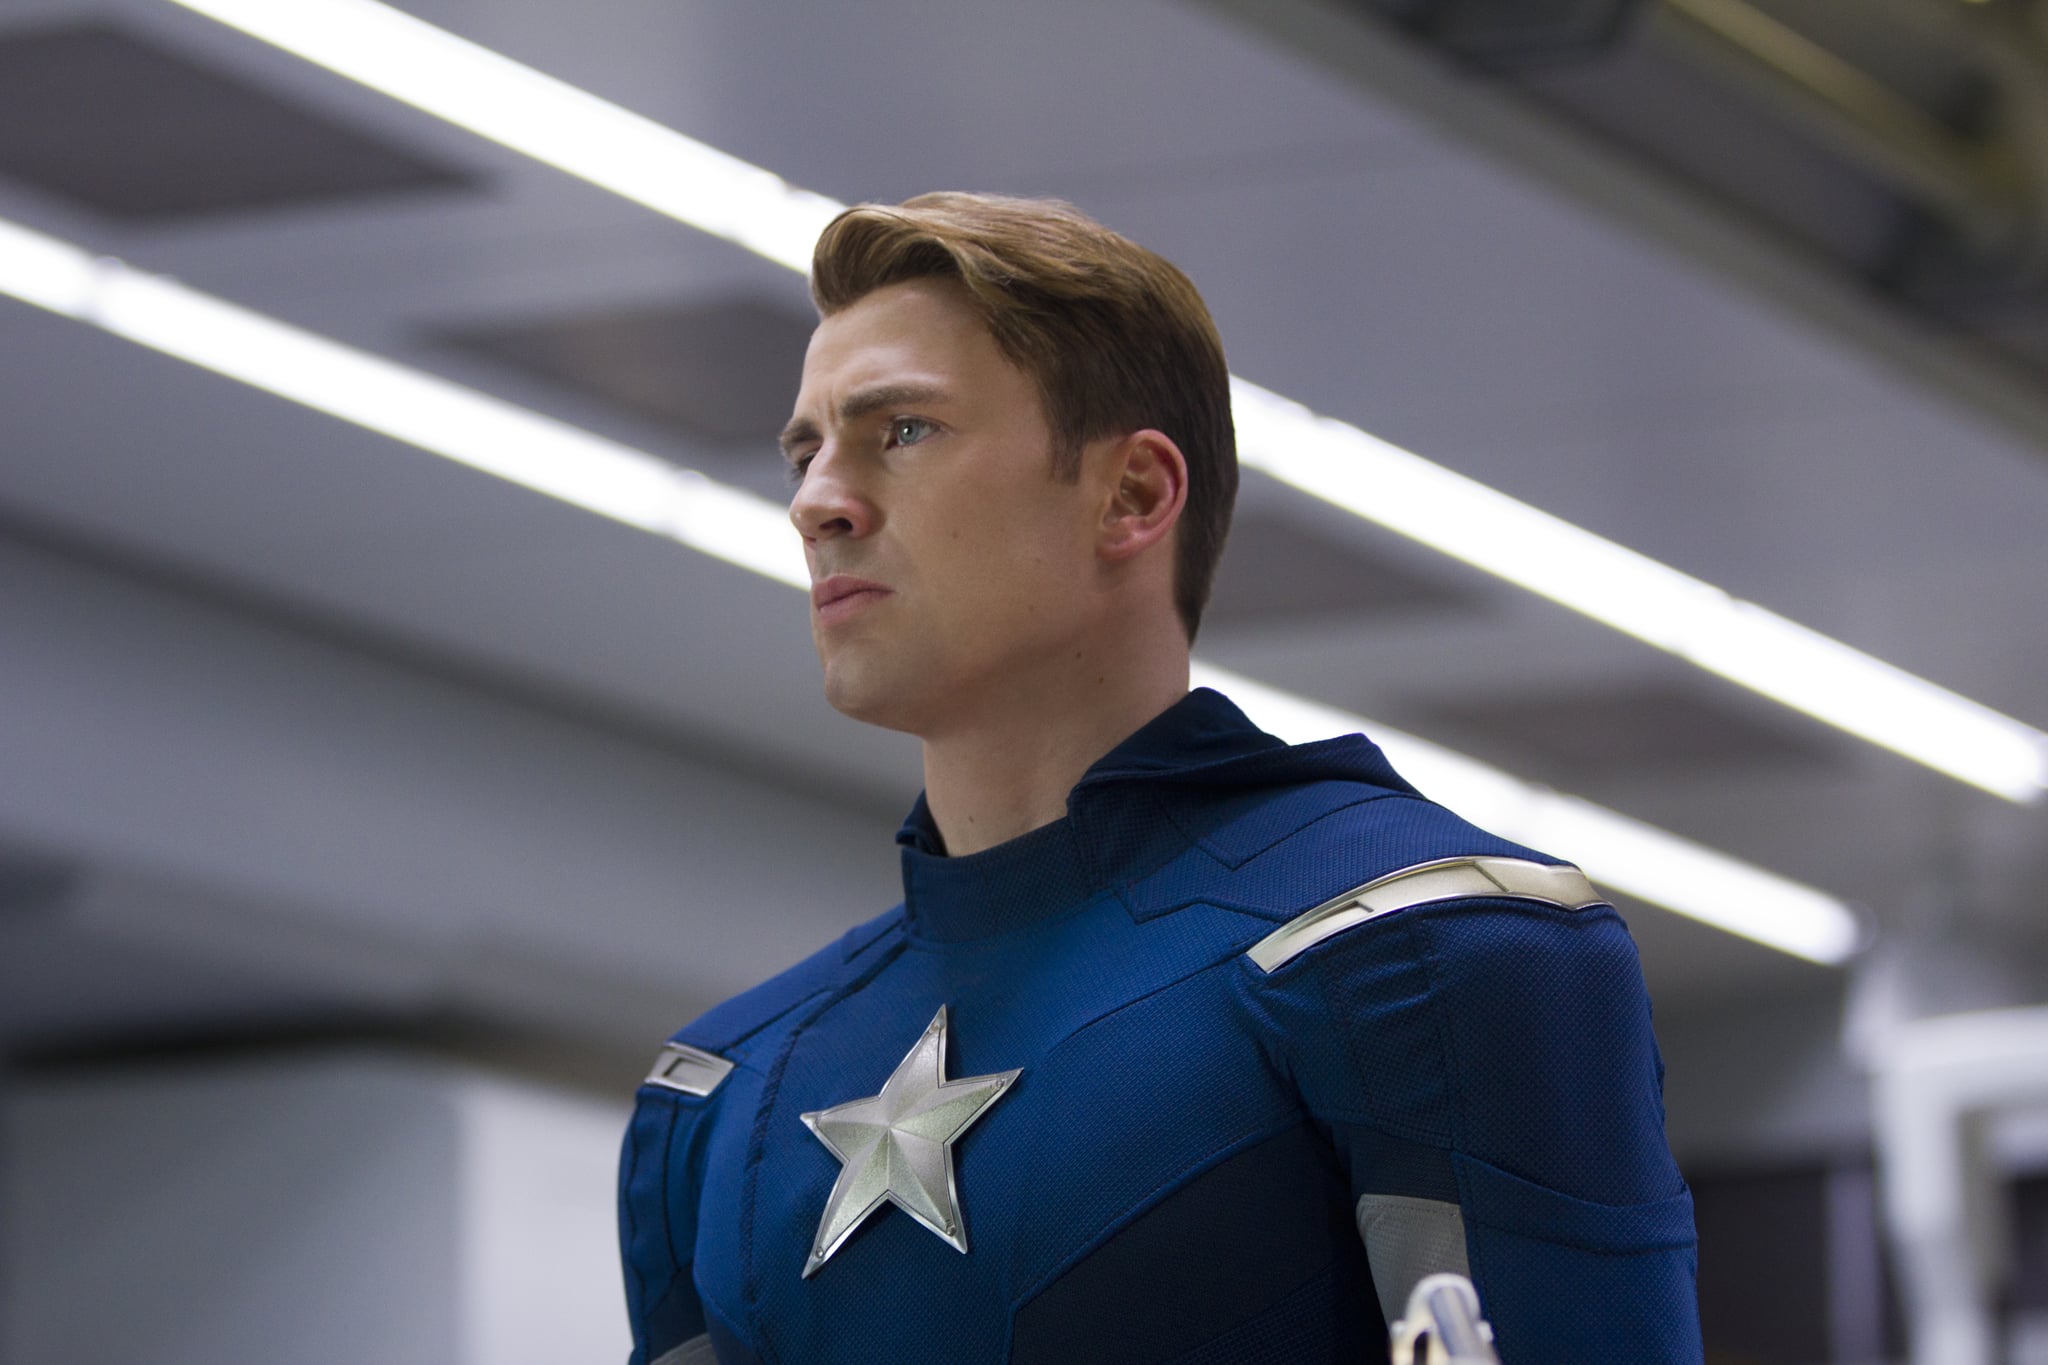 Chris Evans as Captain America in The Avengers. | See All of the ...